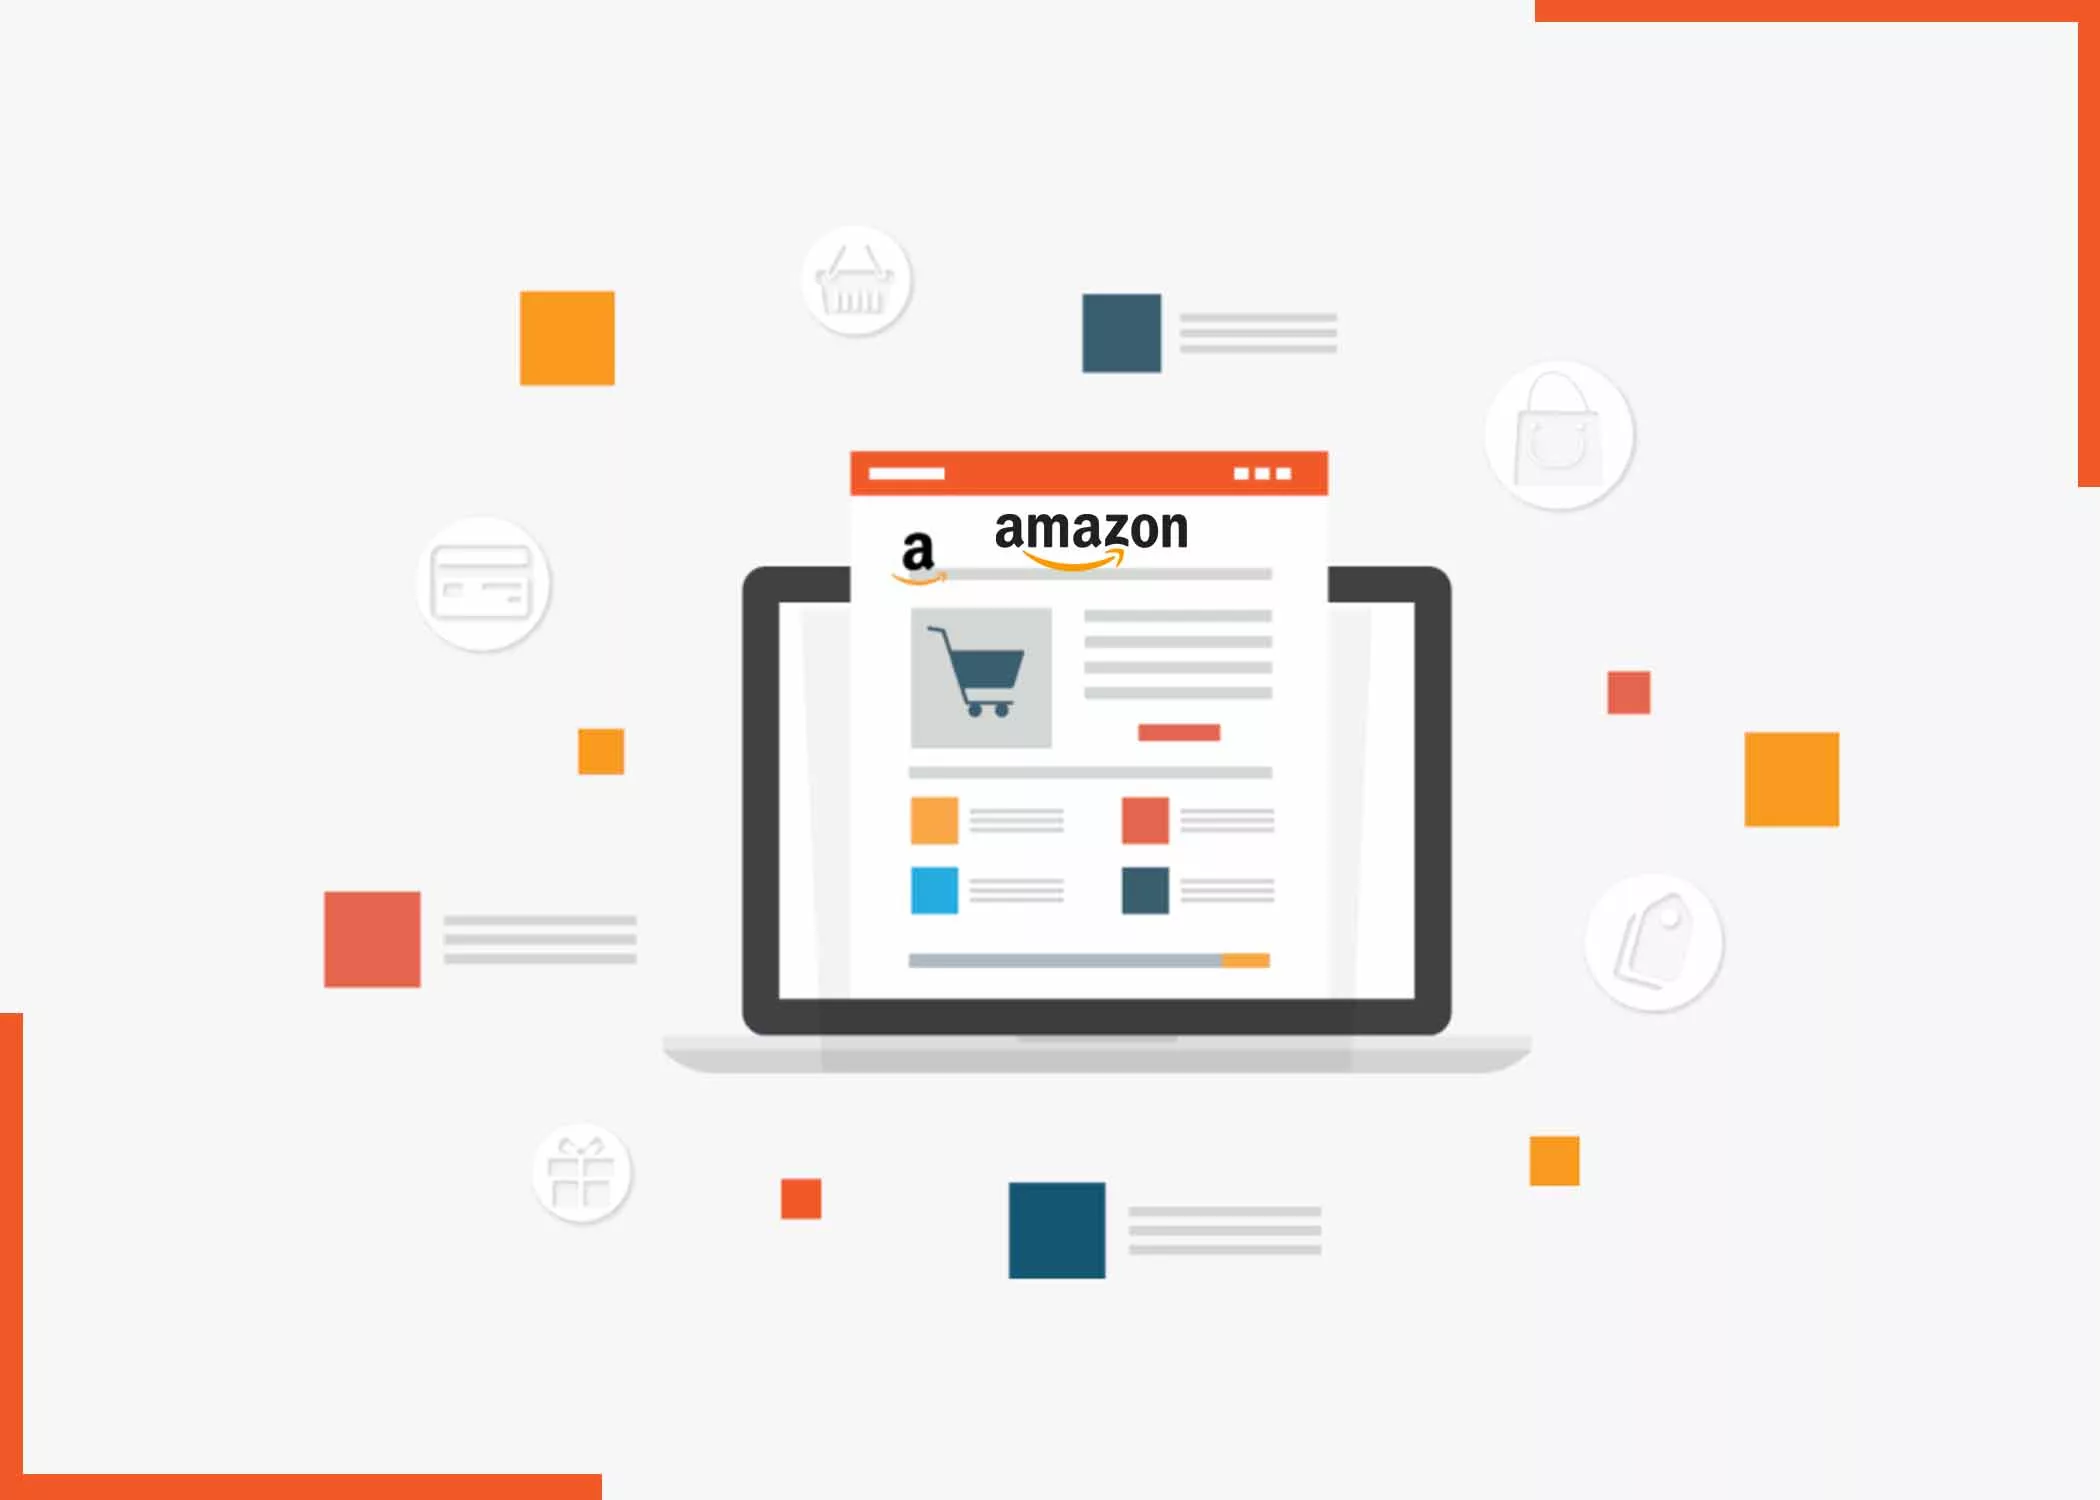 How to Get Your Product Listed on Amazon